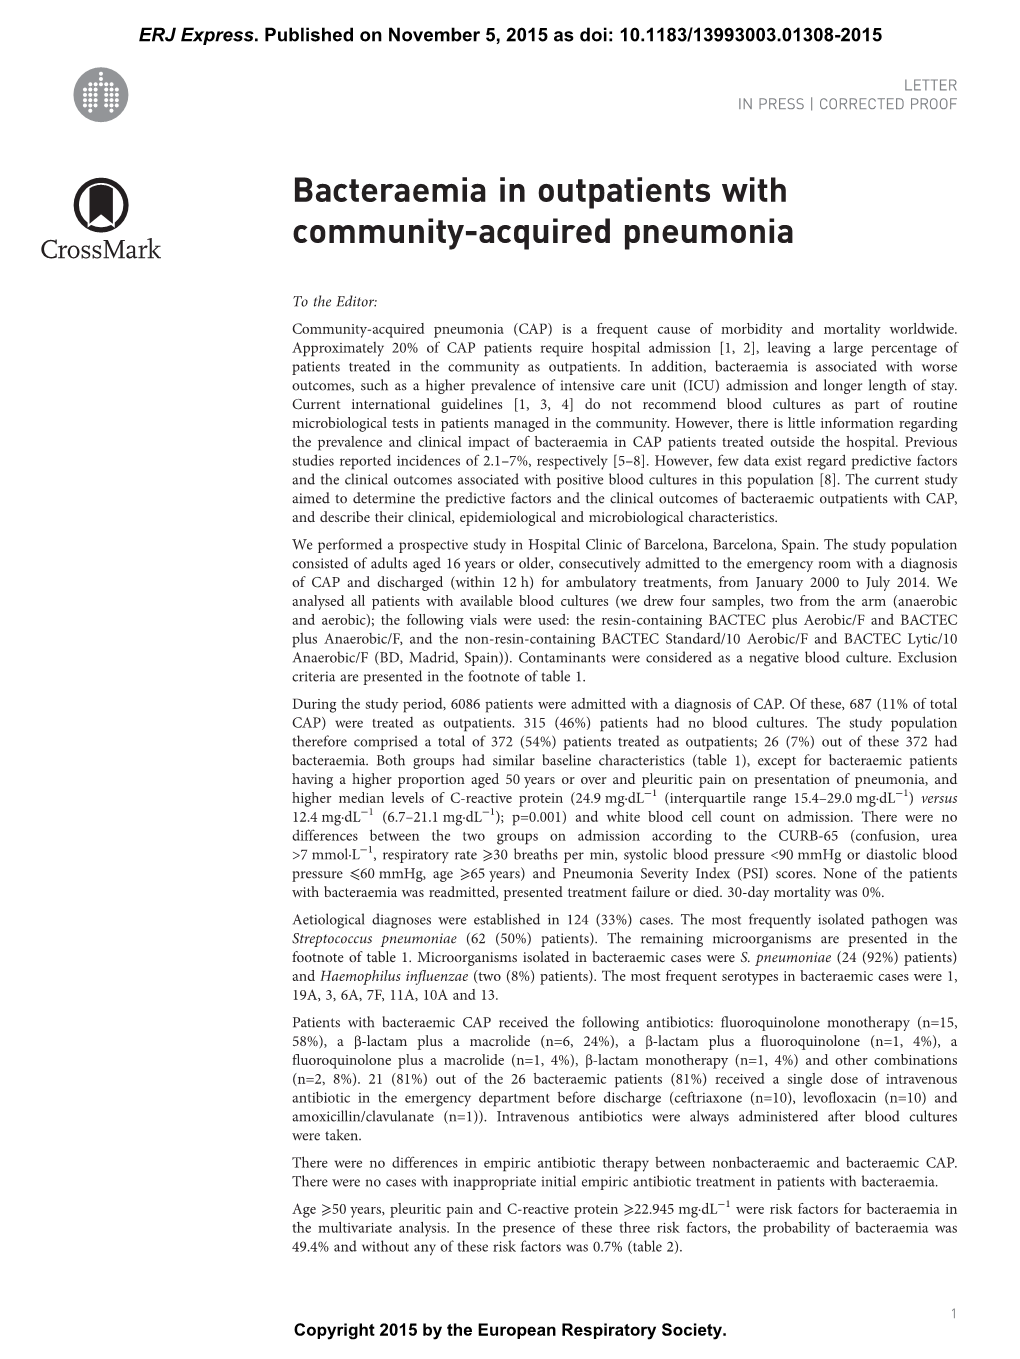 Bacteraemia in Outpatients with Community-Acquired Pneumonia